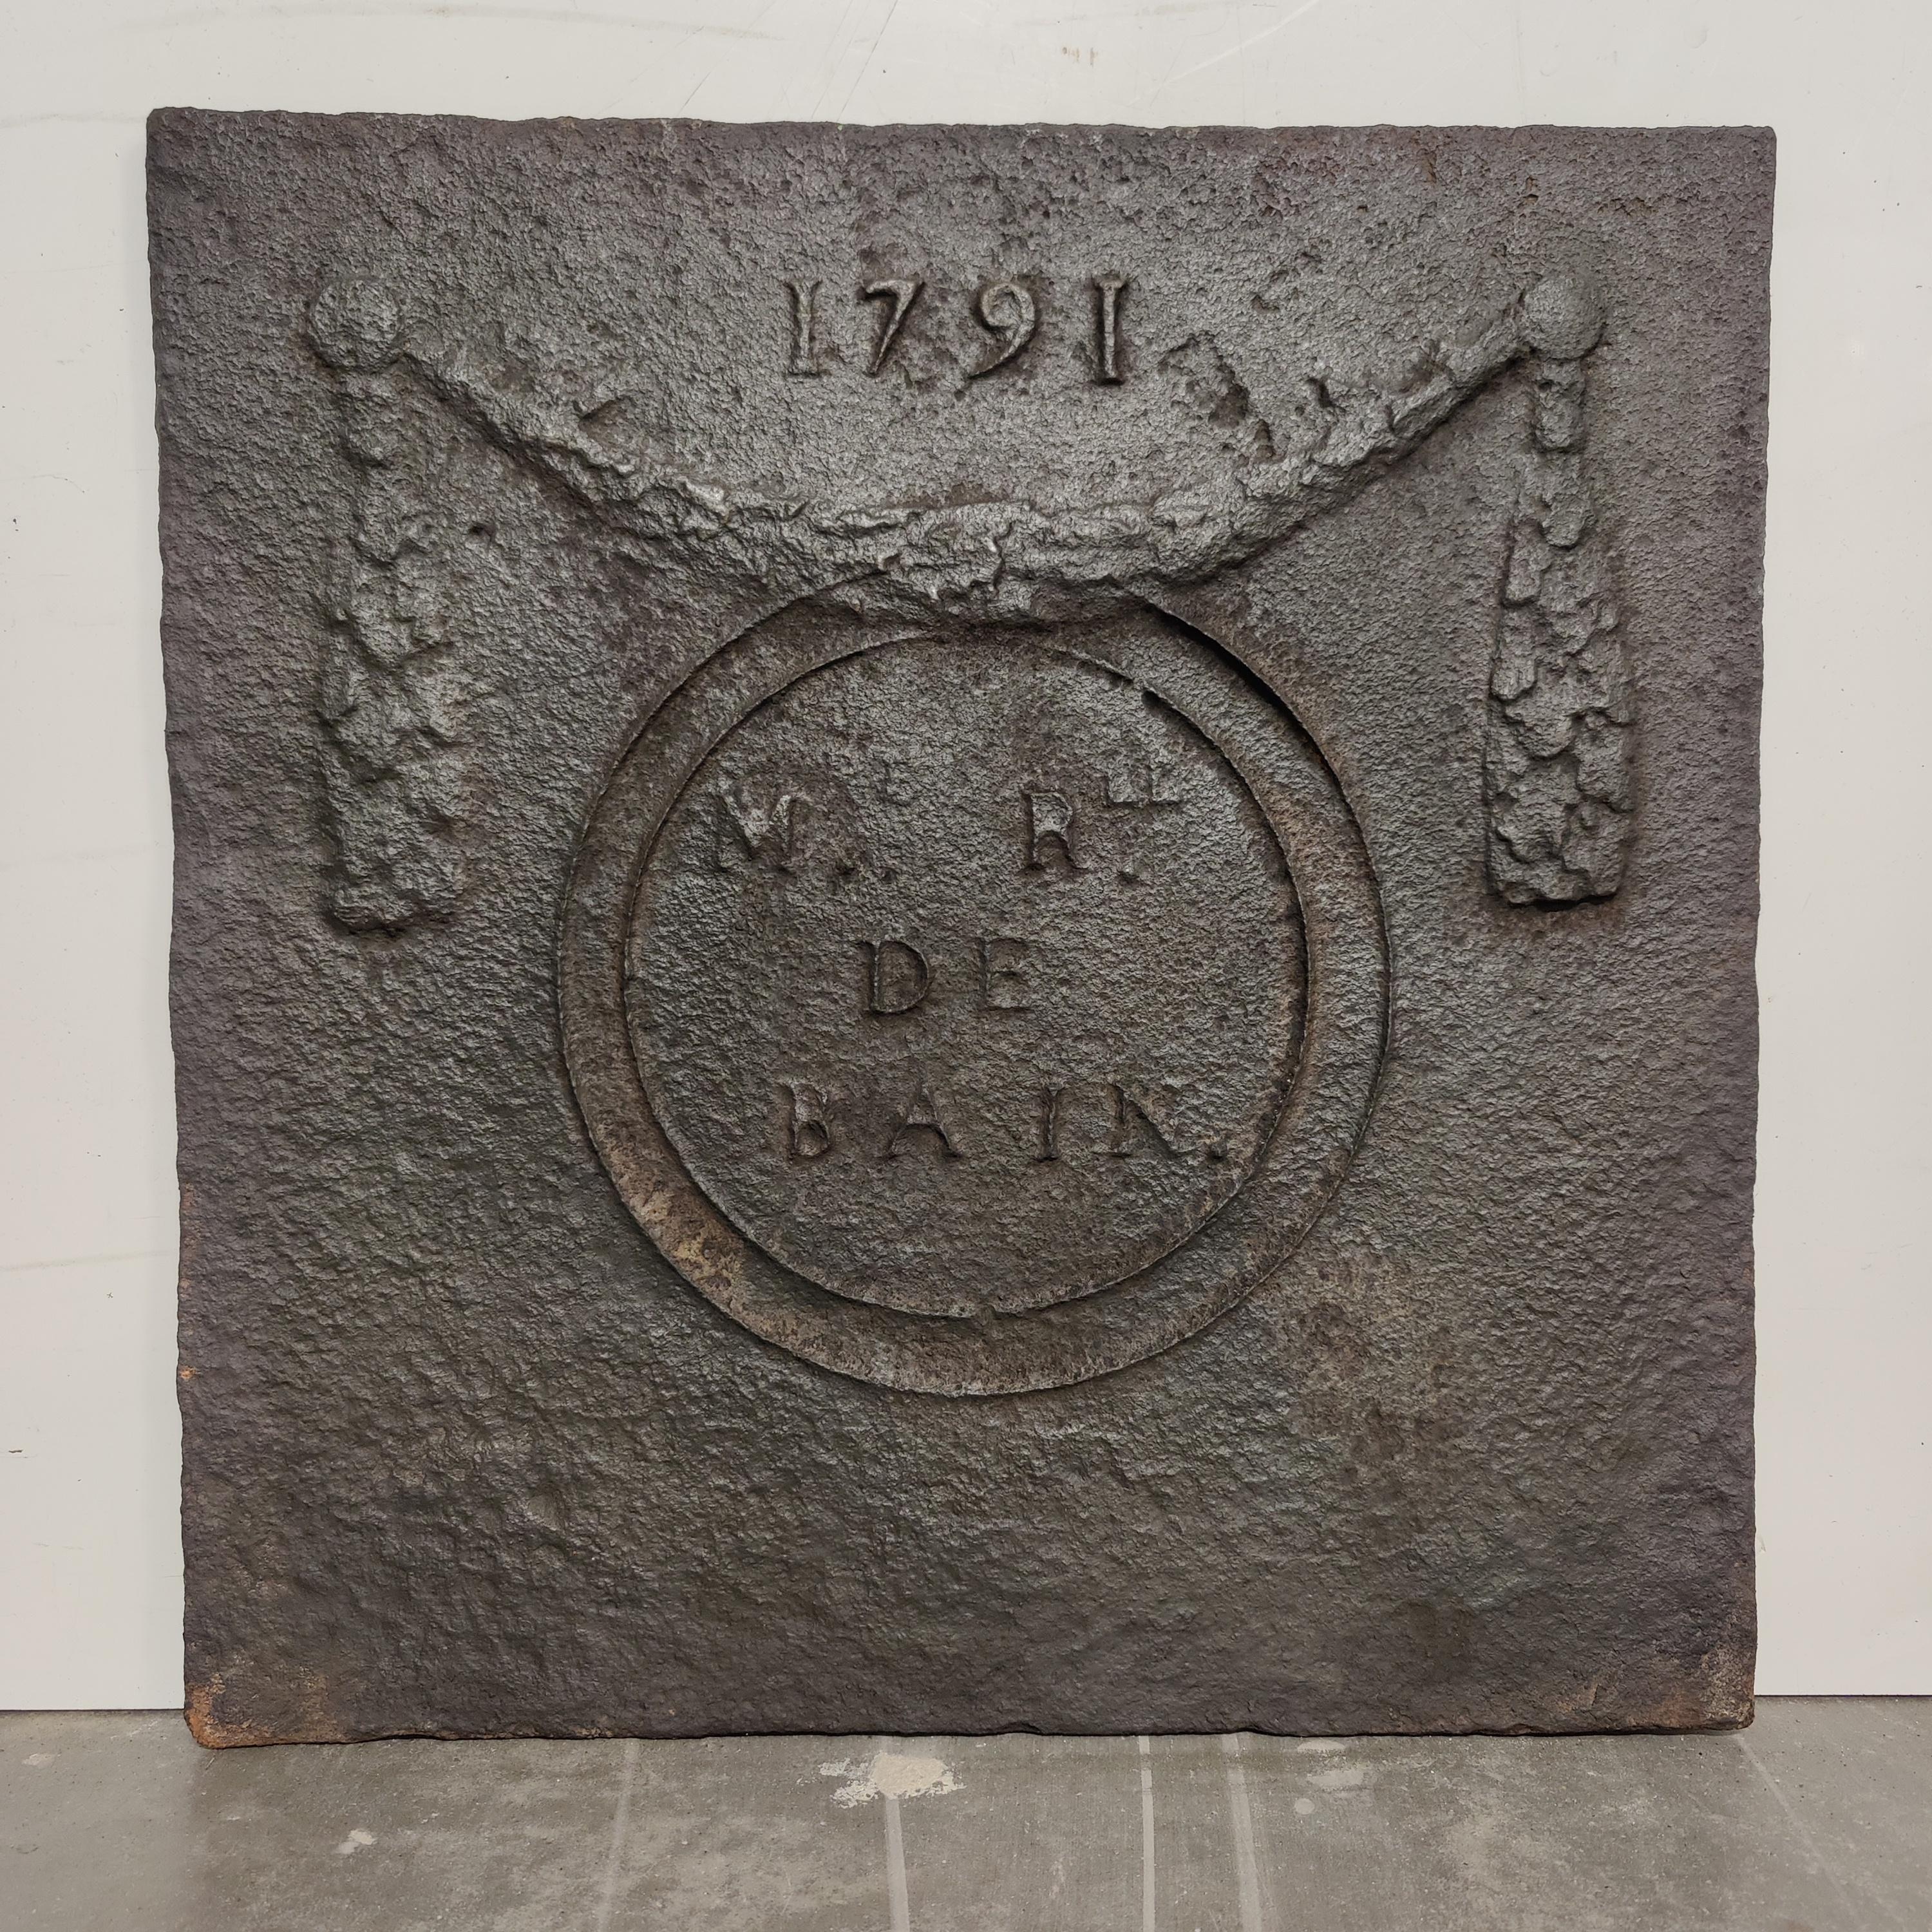 Antique fireback / backsplash, dated 1791.

Nice square cast iron antique fireback displaying a sign covered in laurel wreaths, dated 1791.
Great condition, can be used in a real gas or log fire.
Very decorative piece.

53 lbs / 24 kg.


 